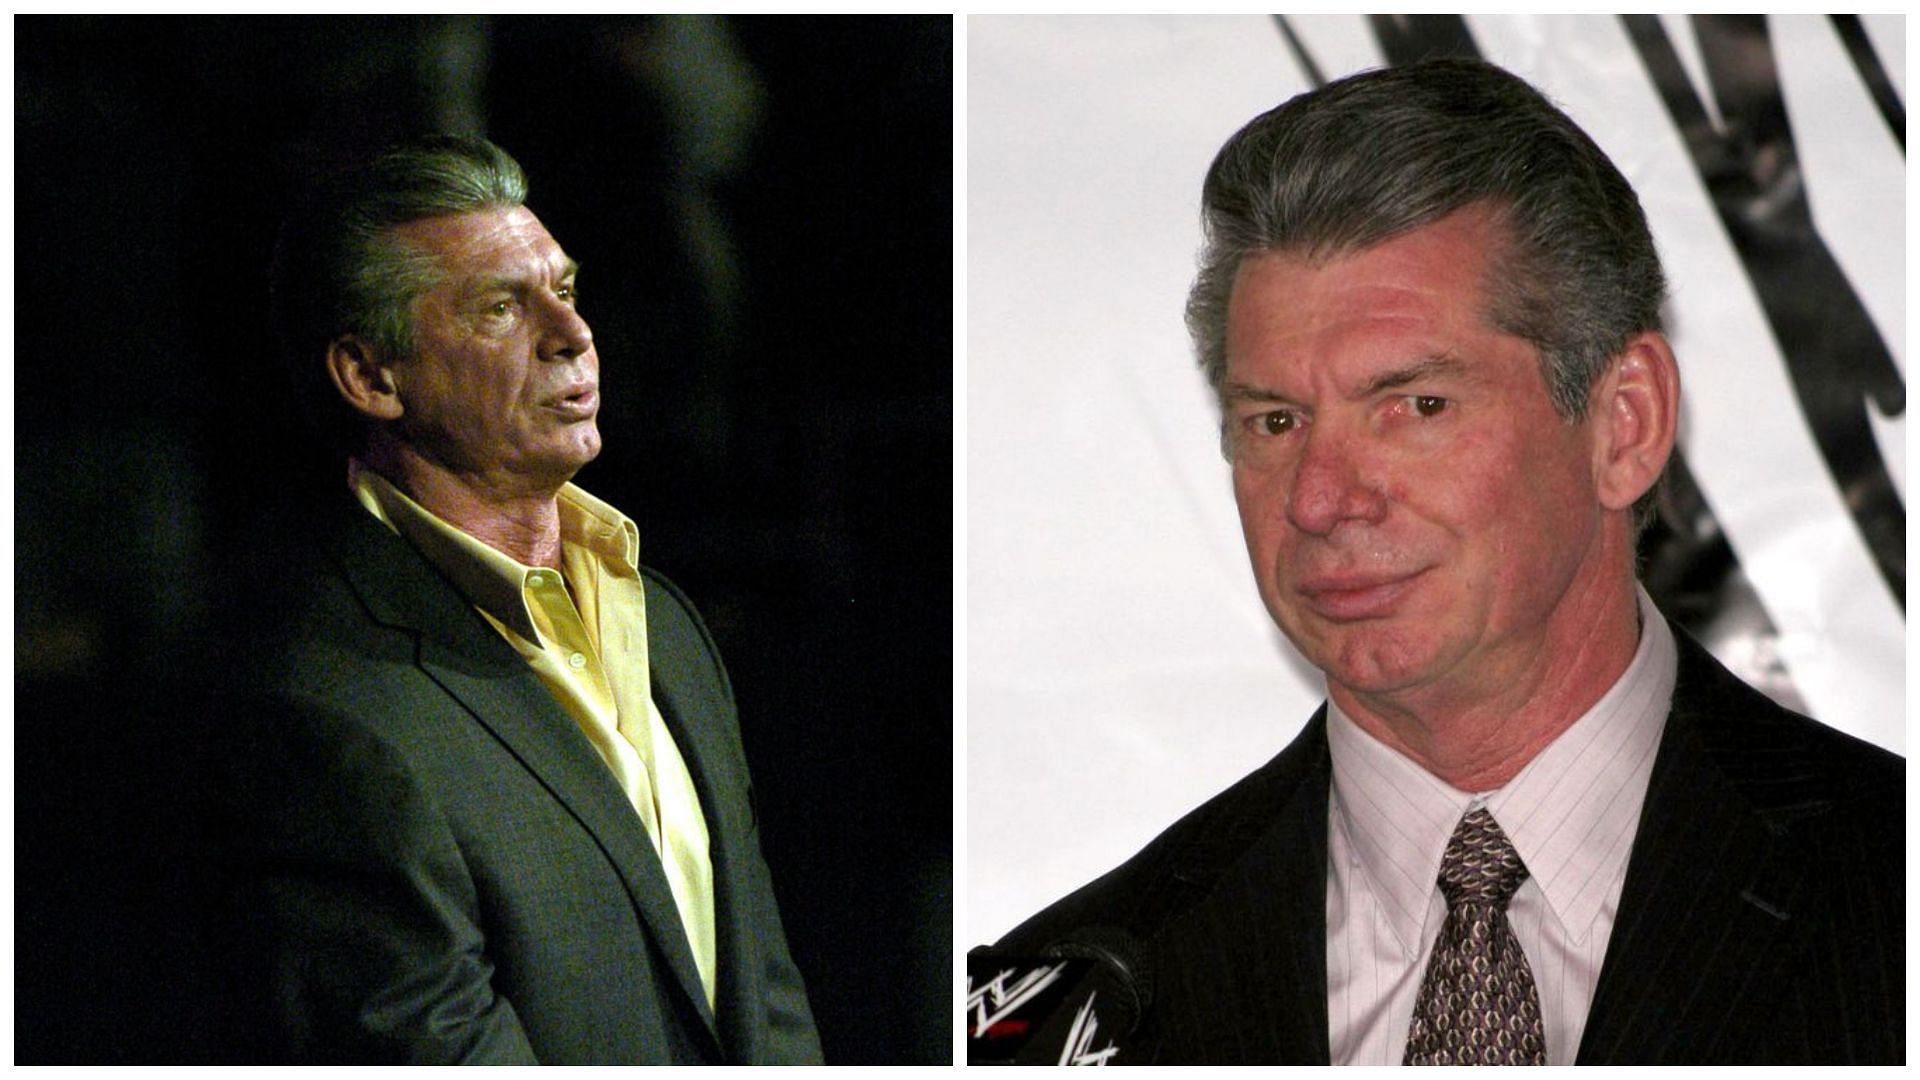 Vince McMahon is the current Executive Chairman of WWE.